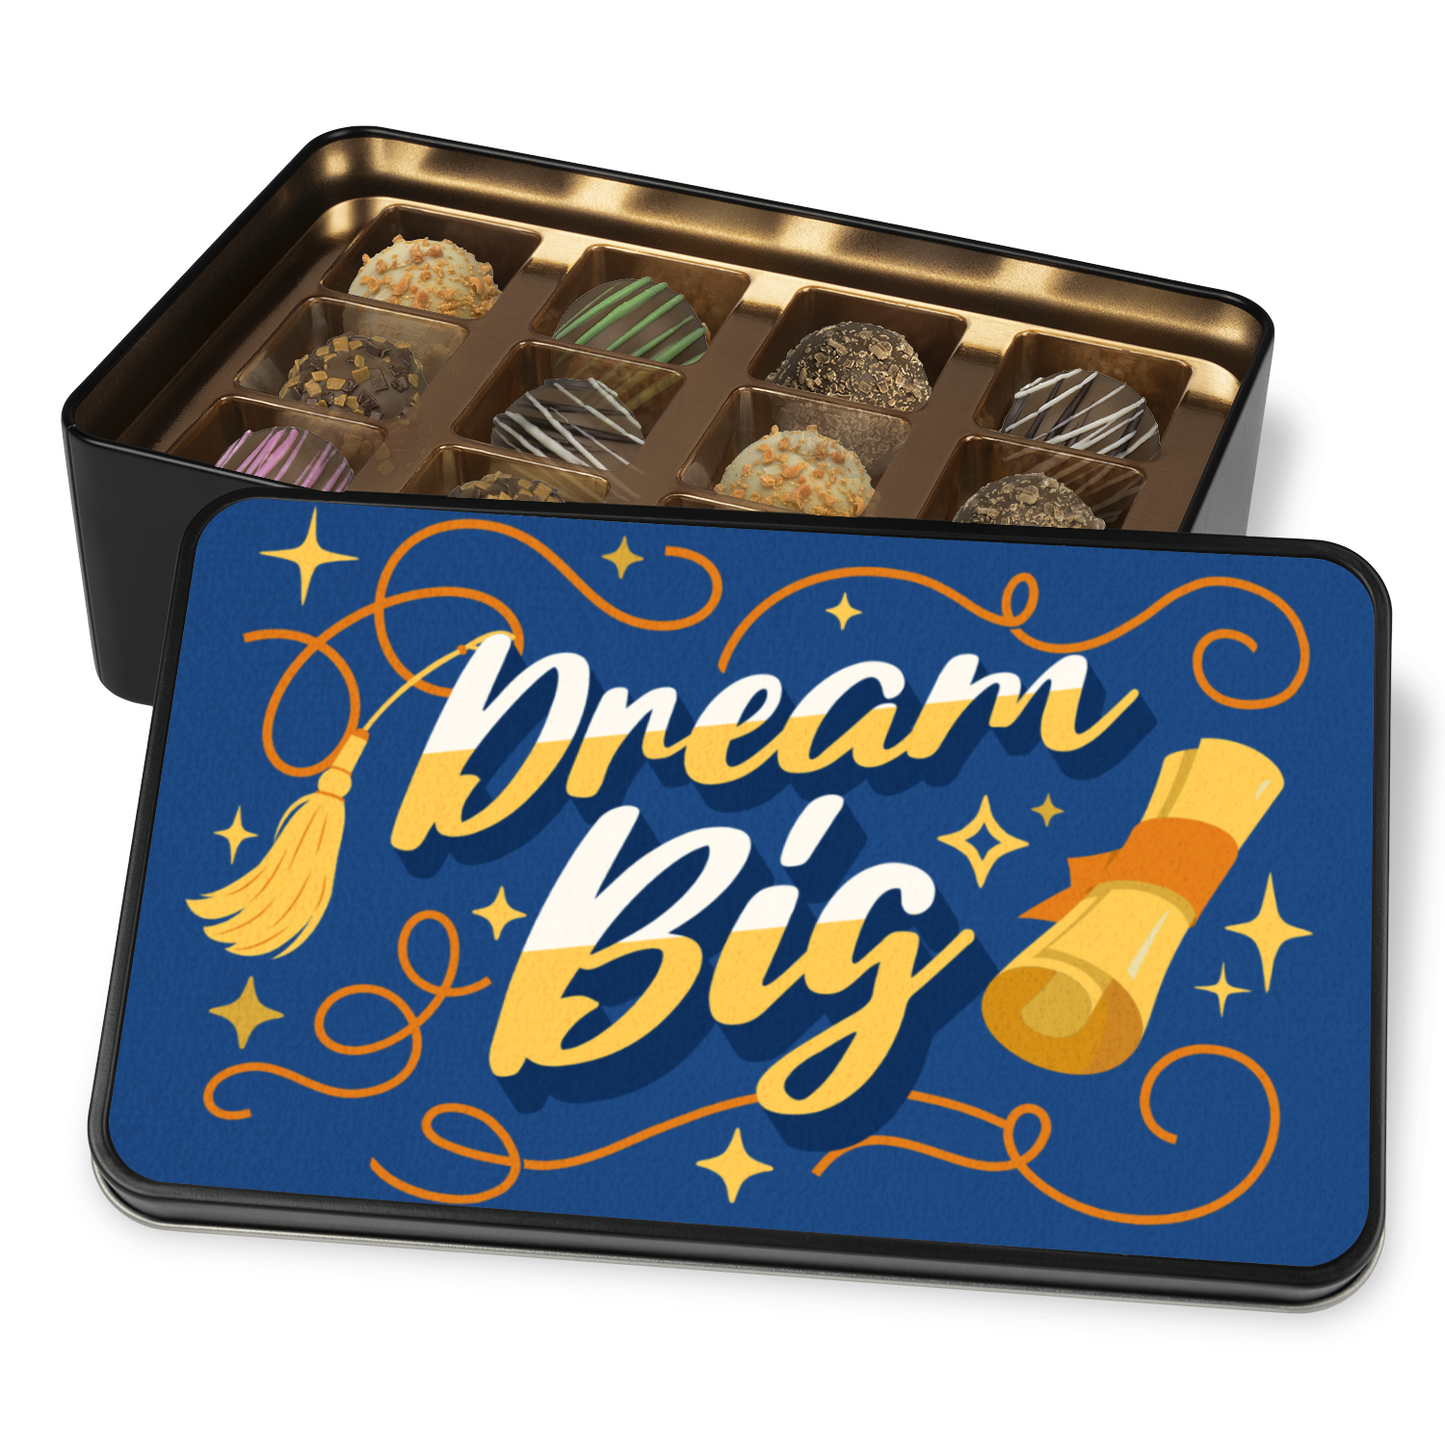 Dream Big Truffle Box - Blue Background with Diploma Graphic - 12 Decadent Assorted Flavors